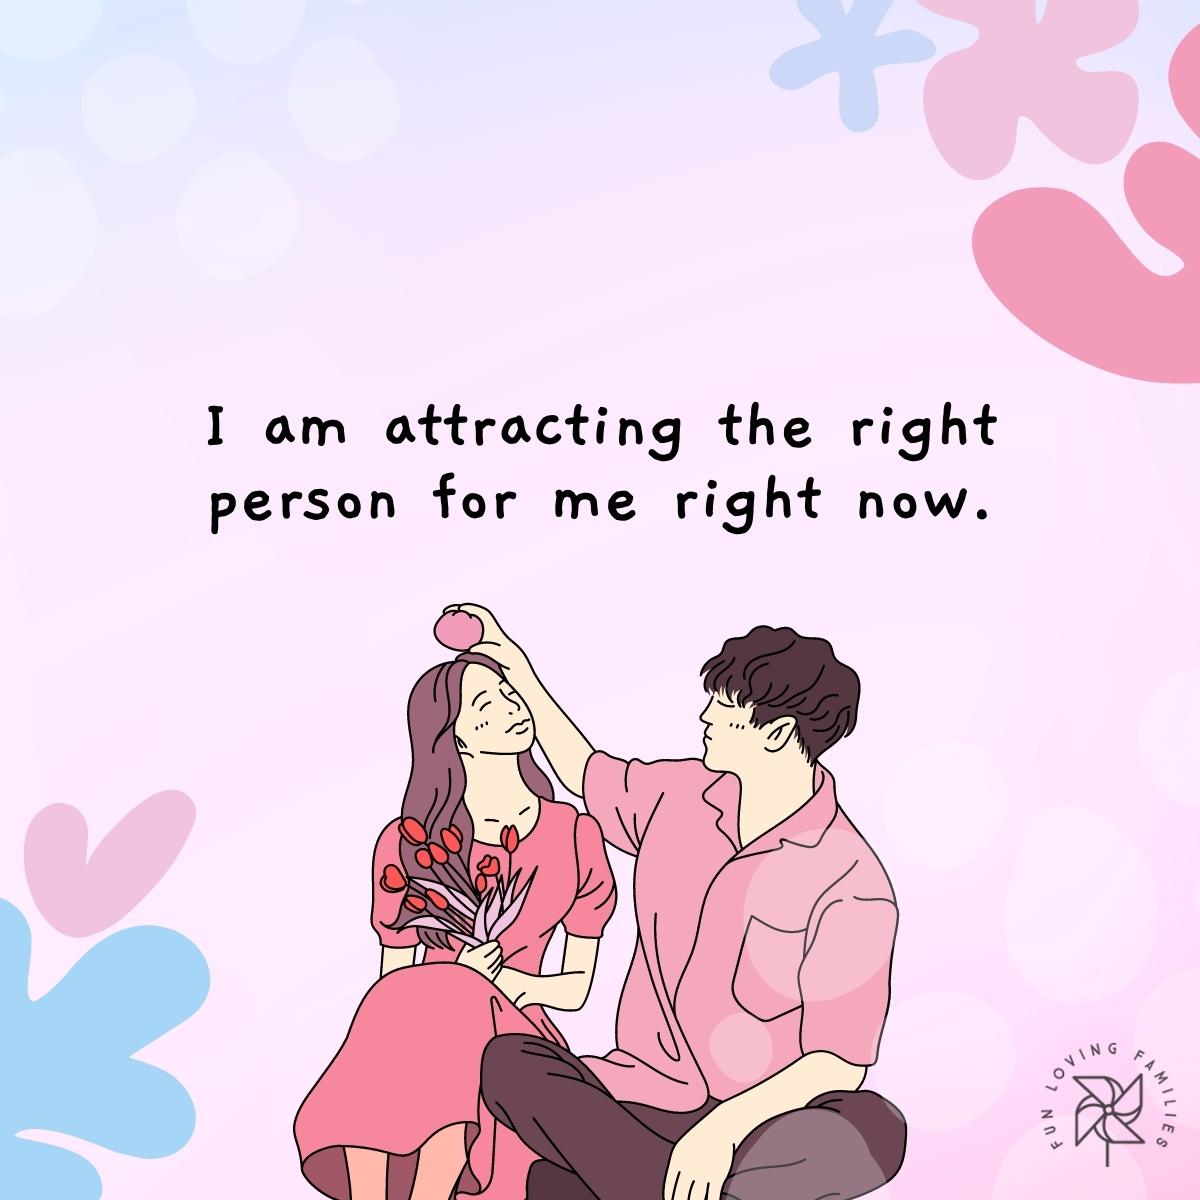 I am attracting the right person for me right now affirmation image